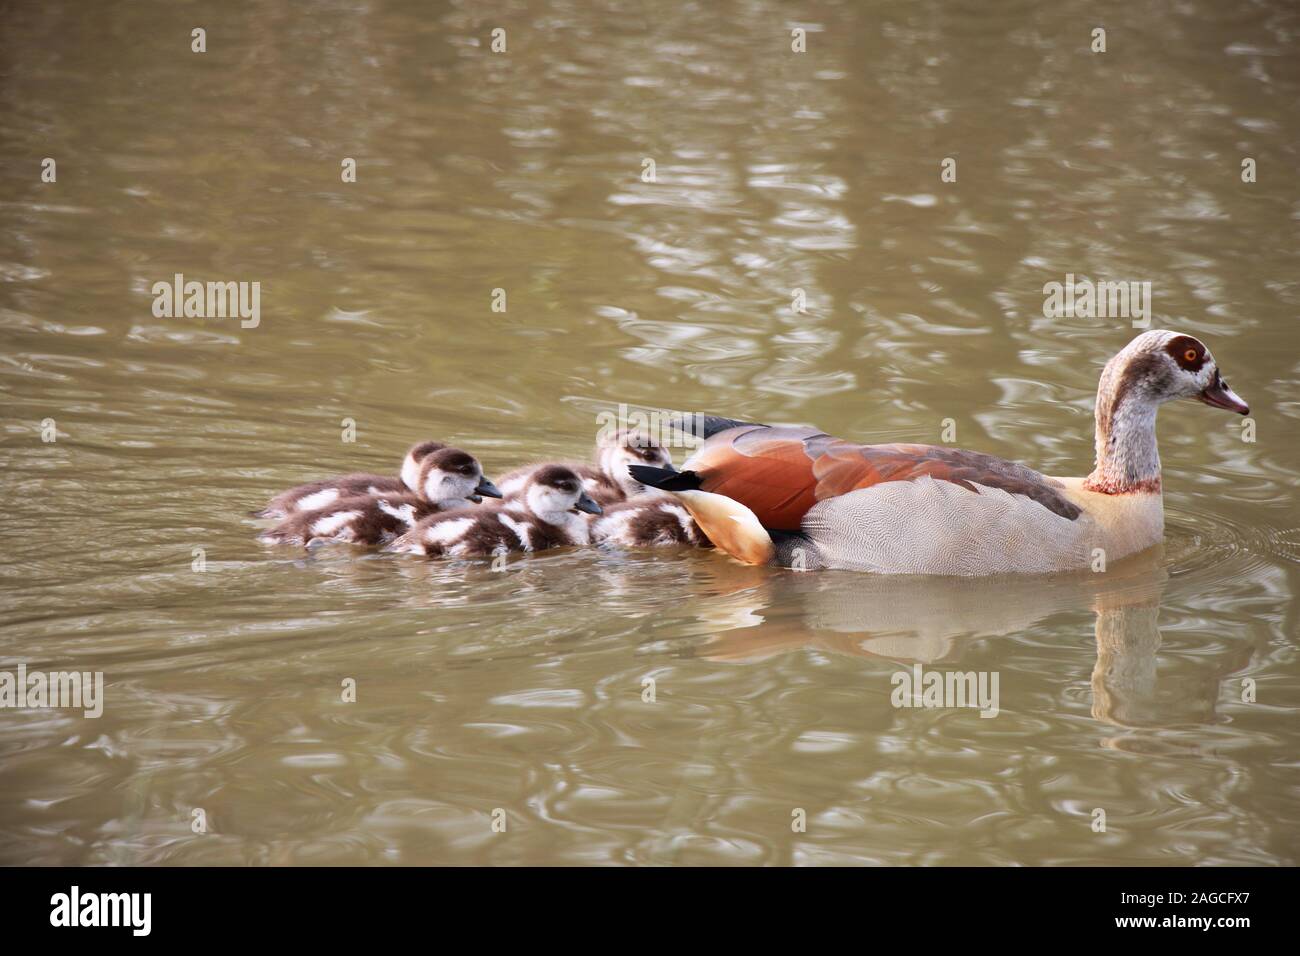 Egyptian goose (Alopochen aegyptiaca) family, mother with goslings in an English park. Stock Photo